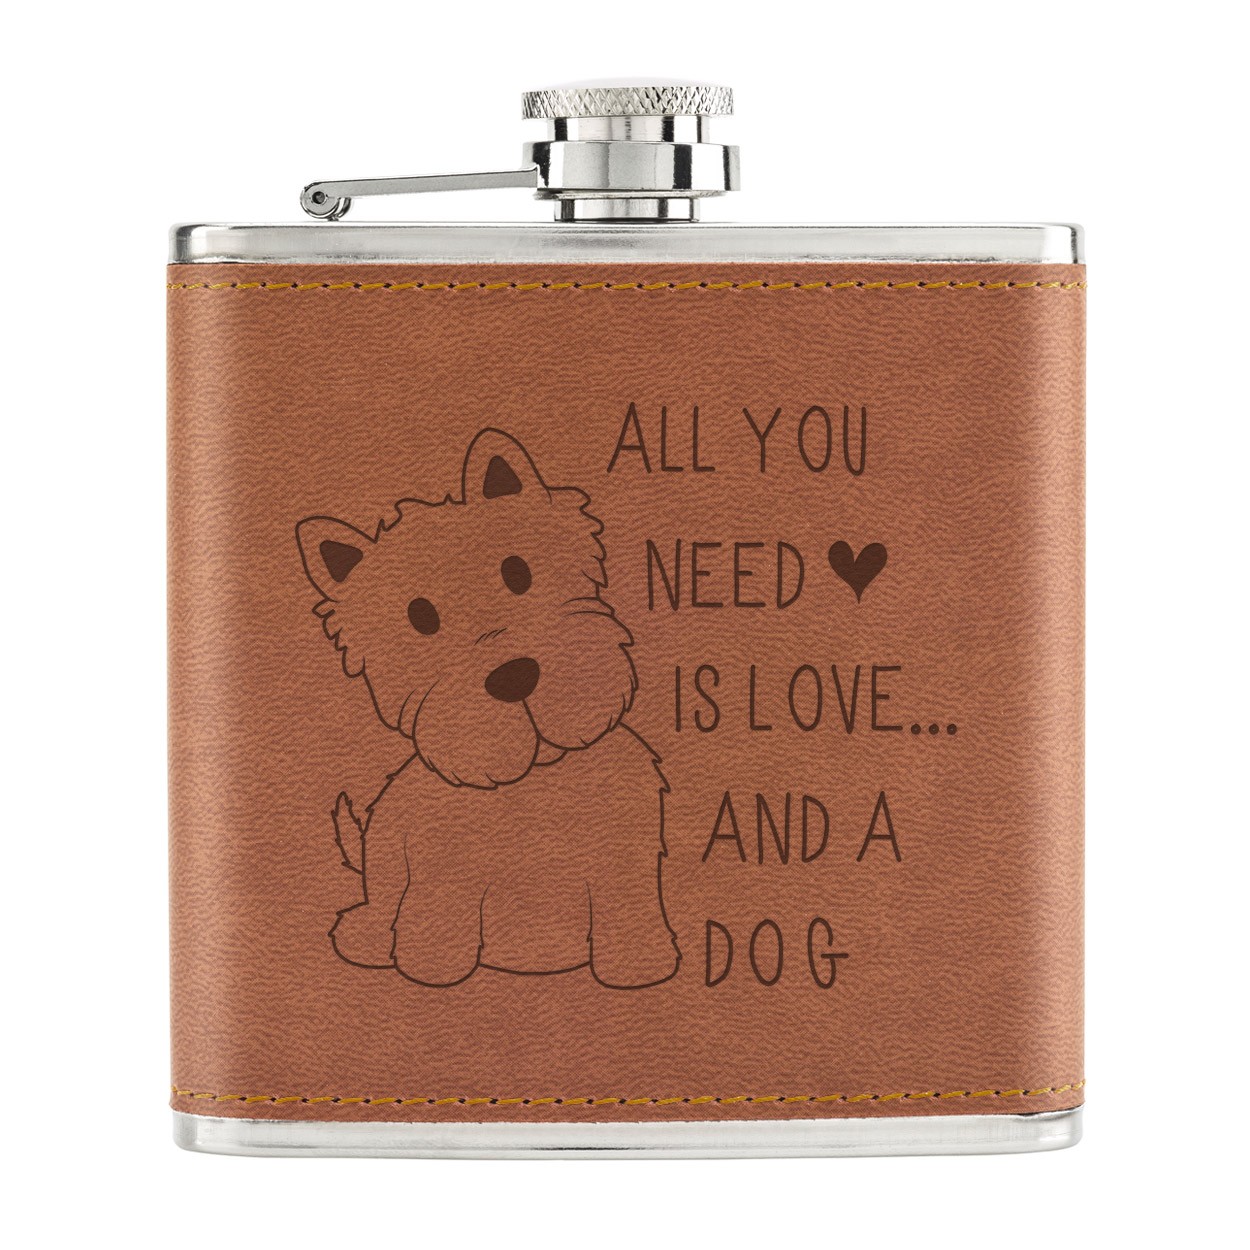 All You Need Is Love And A Dog 6oz PU Leather Hip Flask Tan